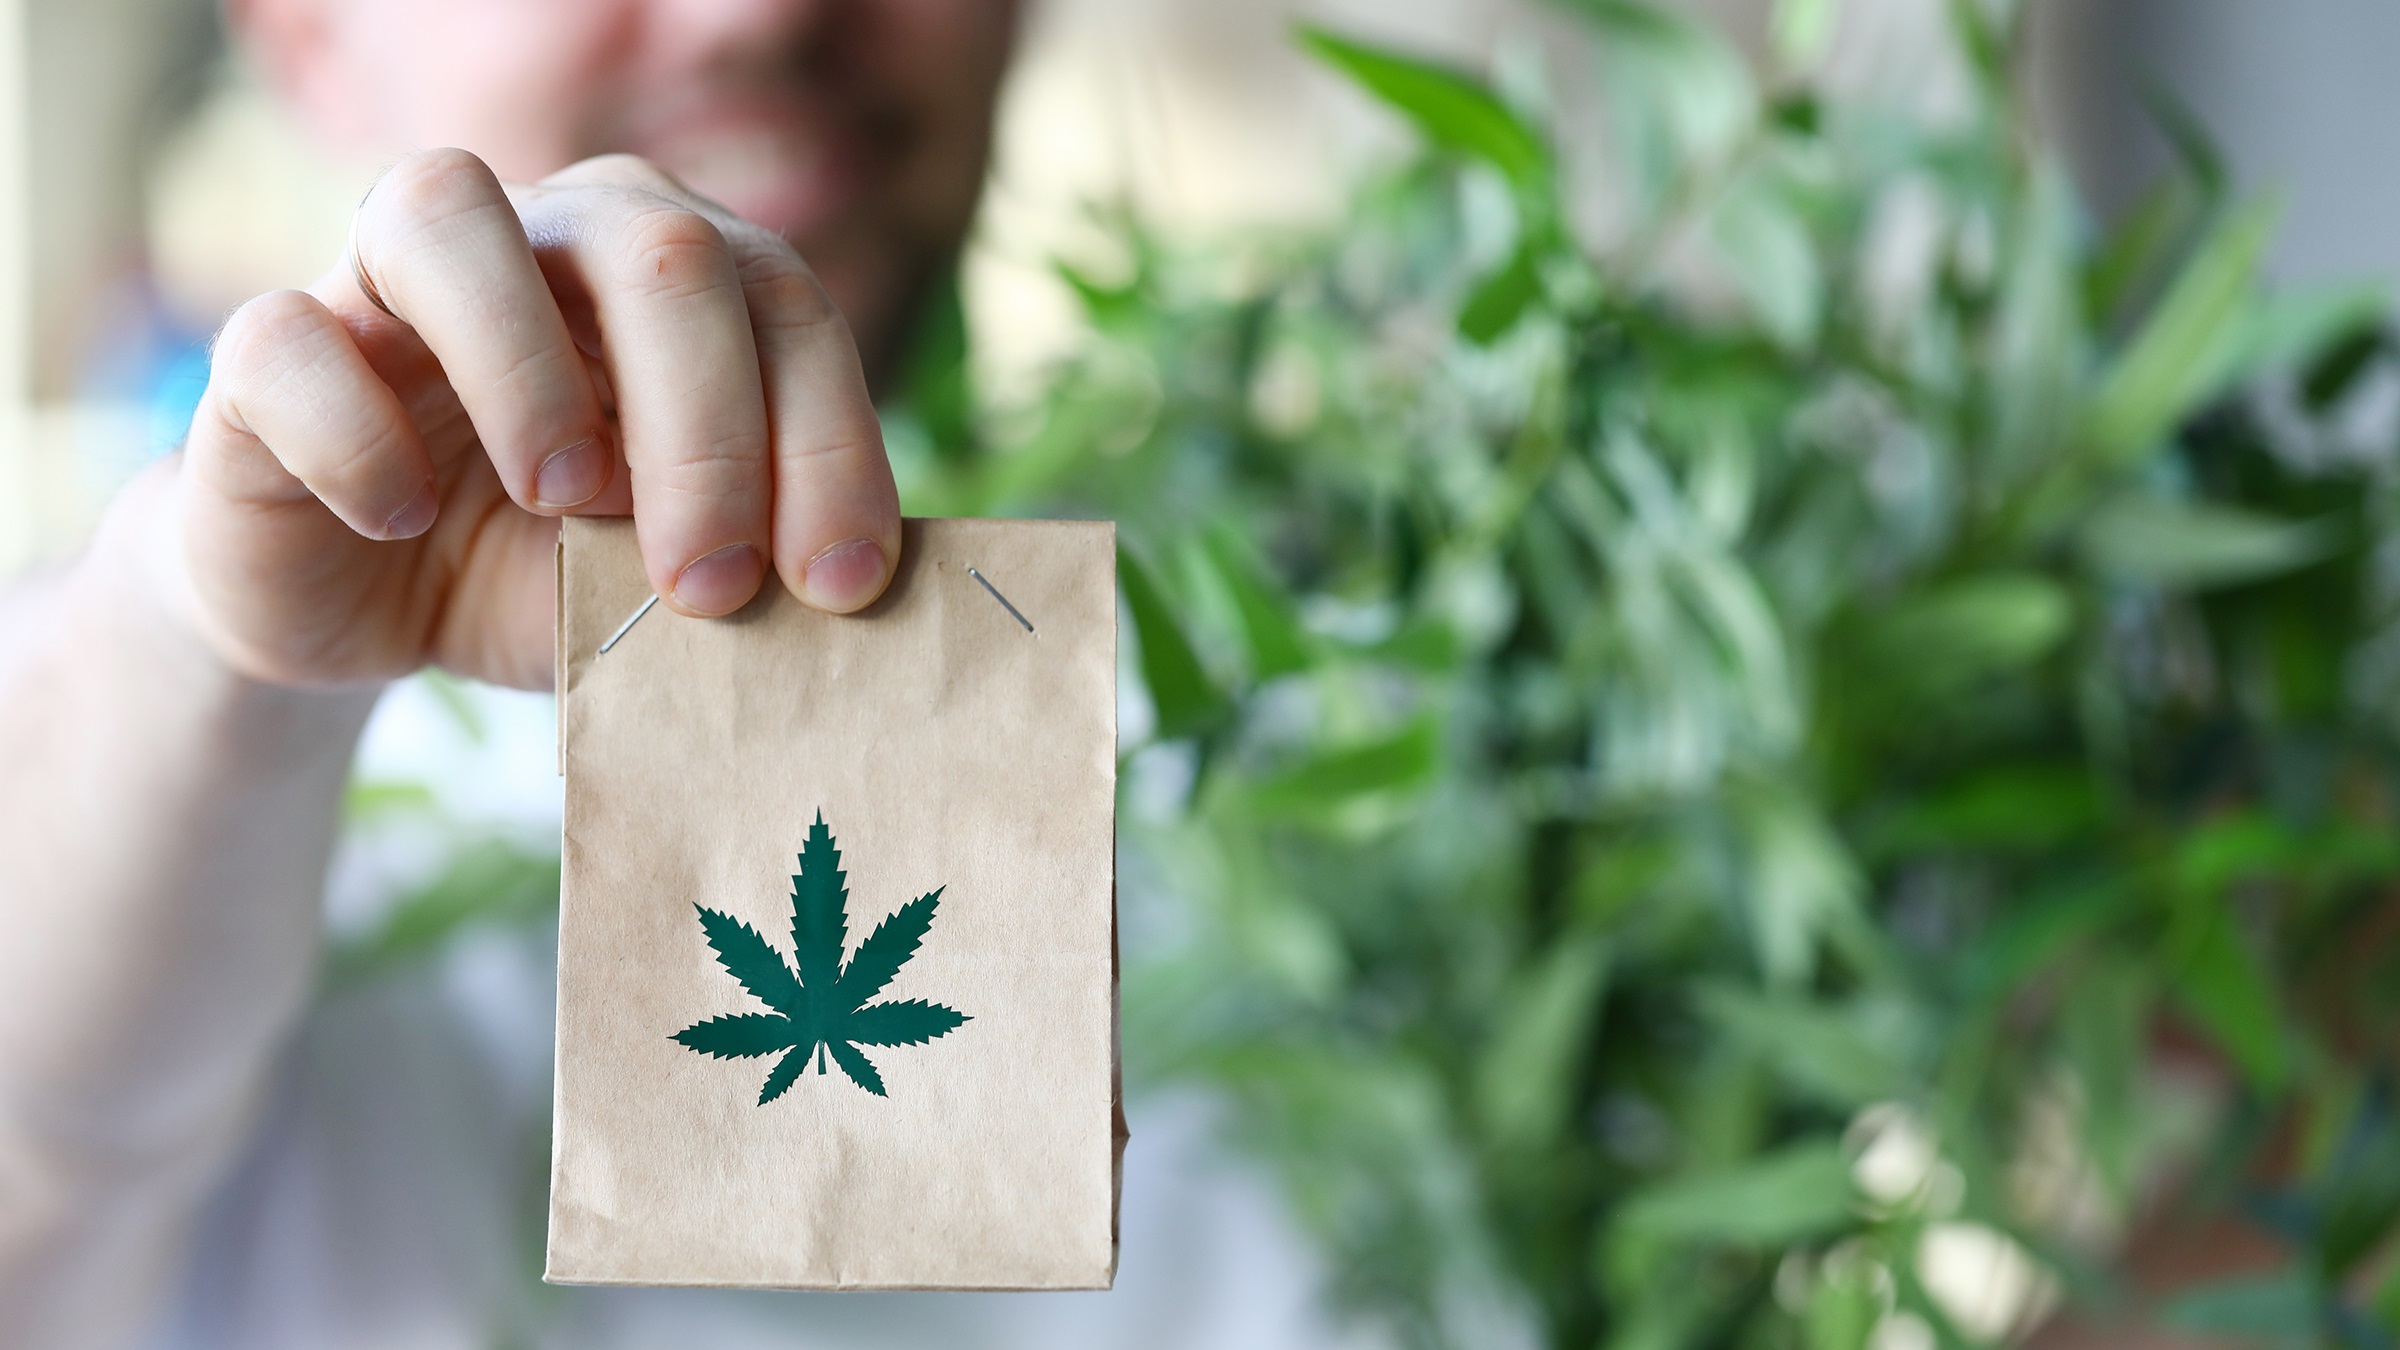 Do I need a medical card to buy cannabis from a dispensary?